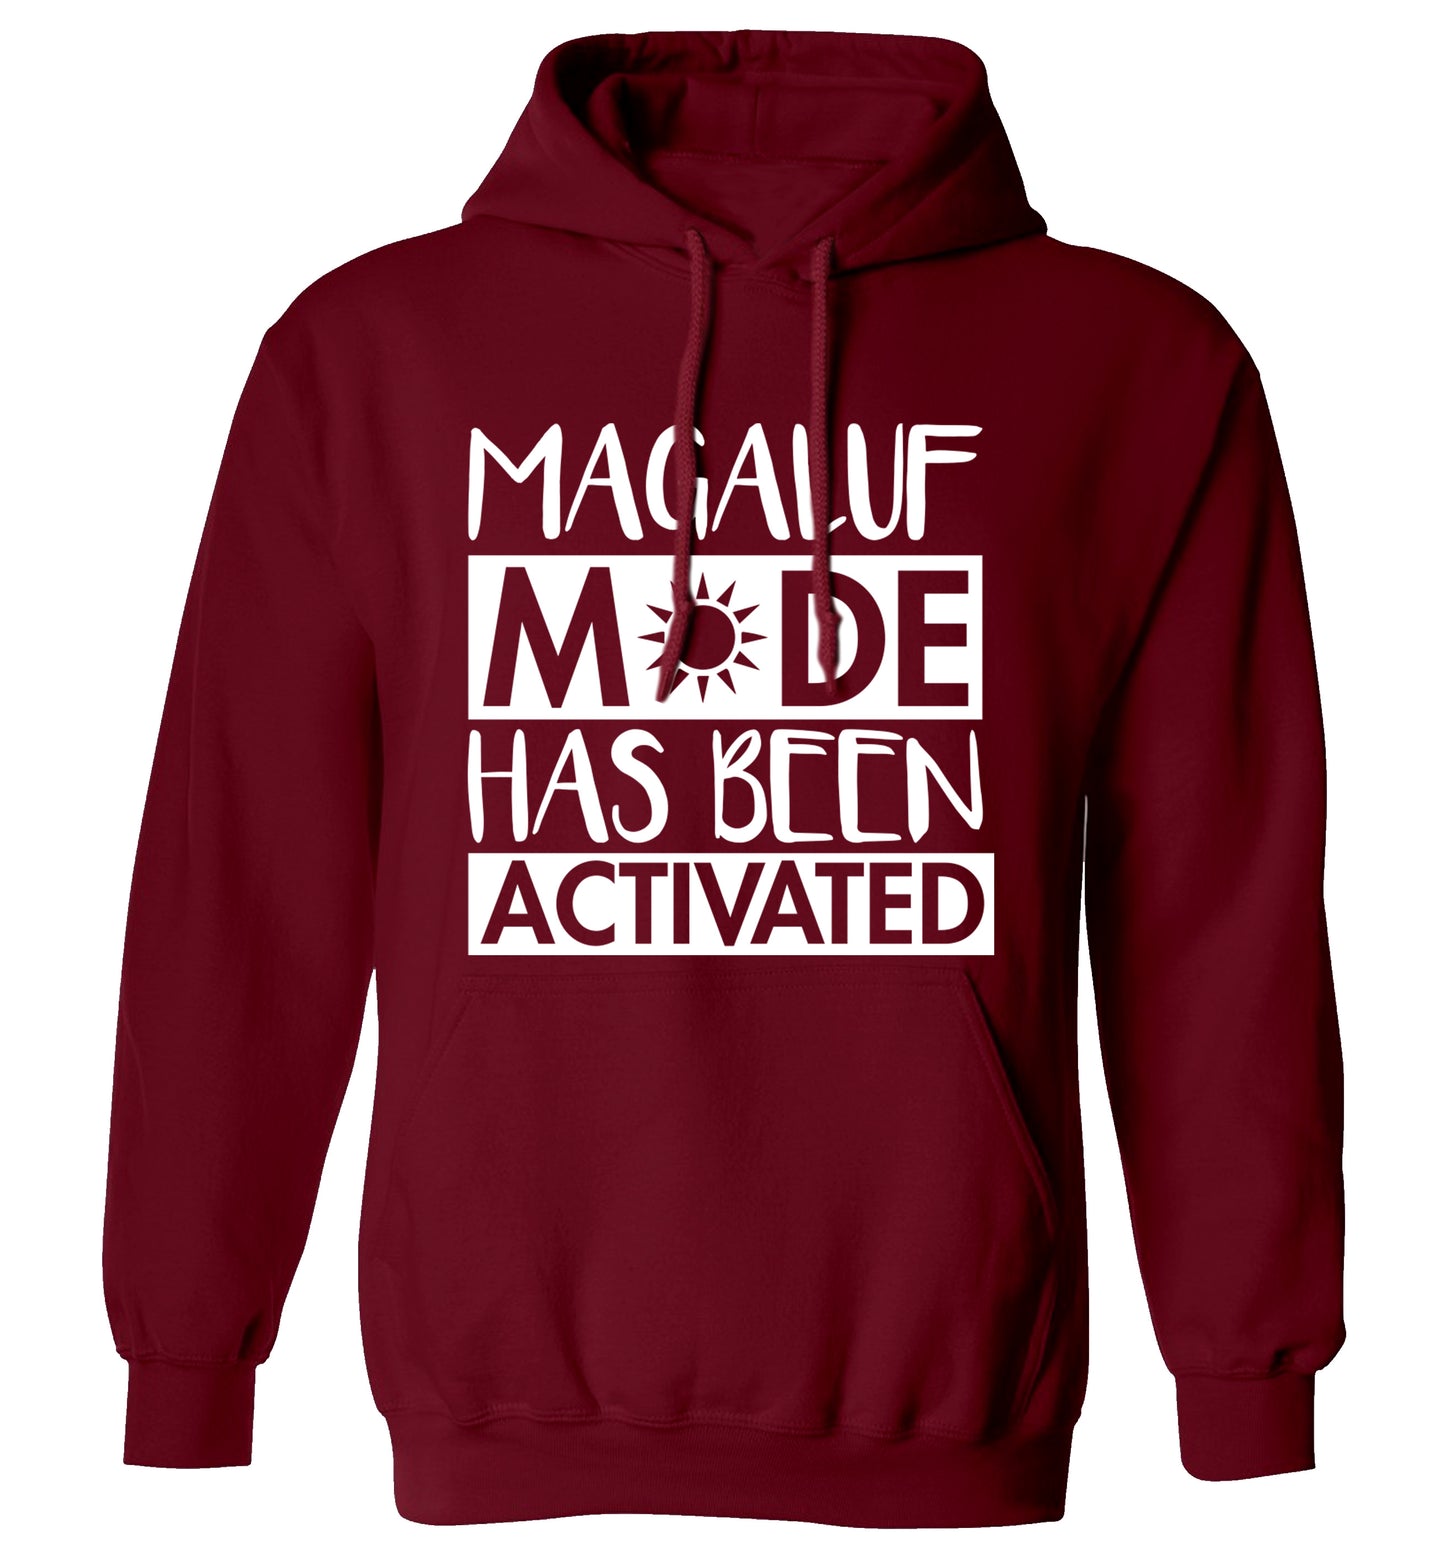 Magaluf mode has been activated adults unisex maroon hoodie 2XL